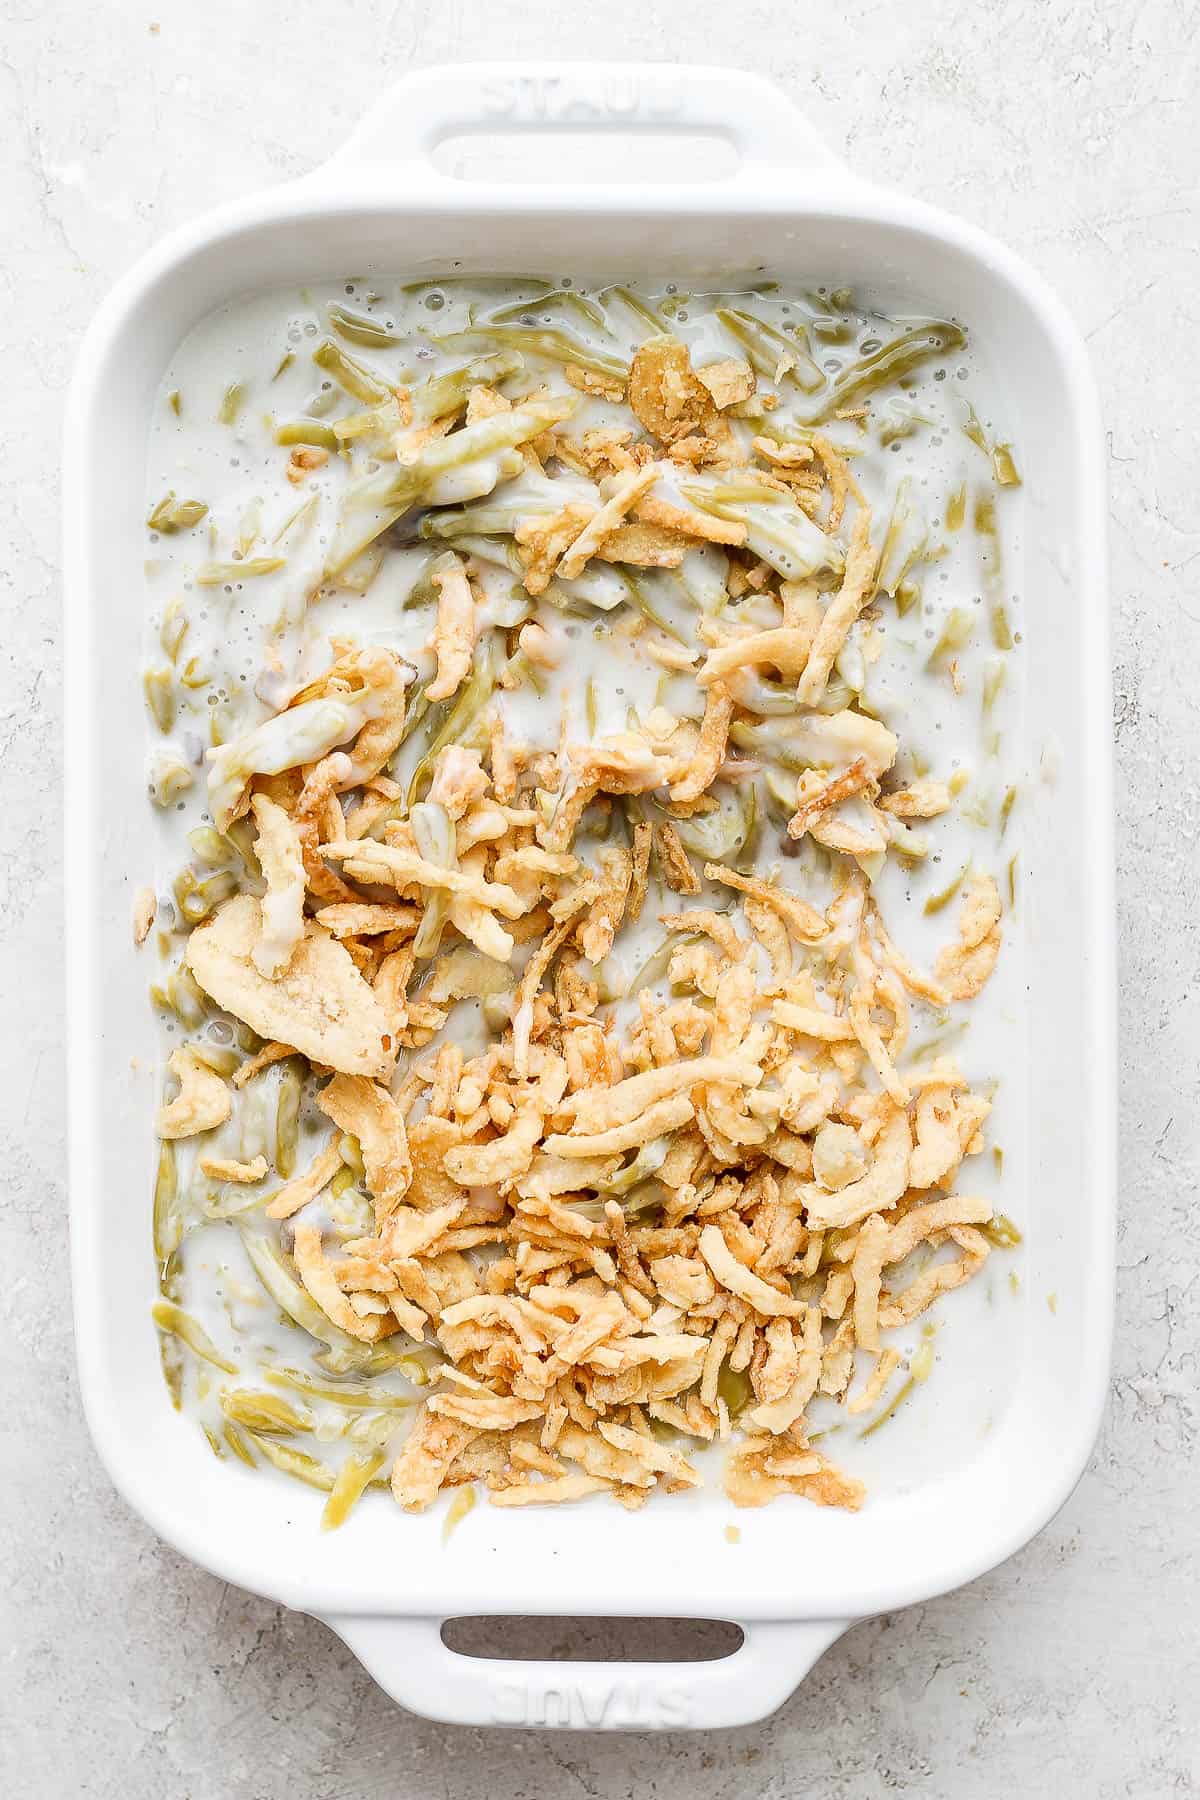 A half cup of french fried onions added to the baking dish.